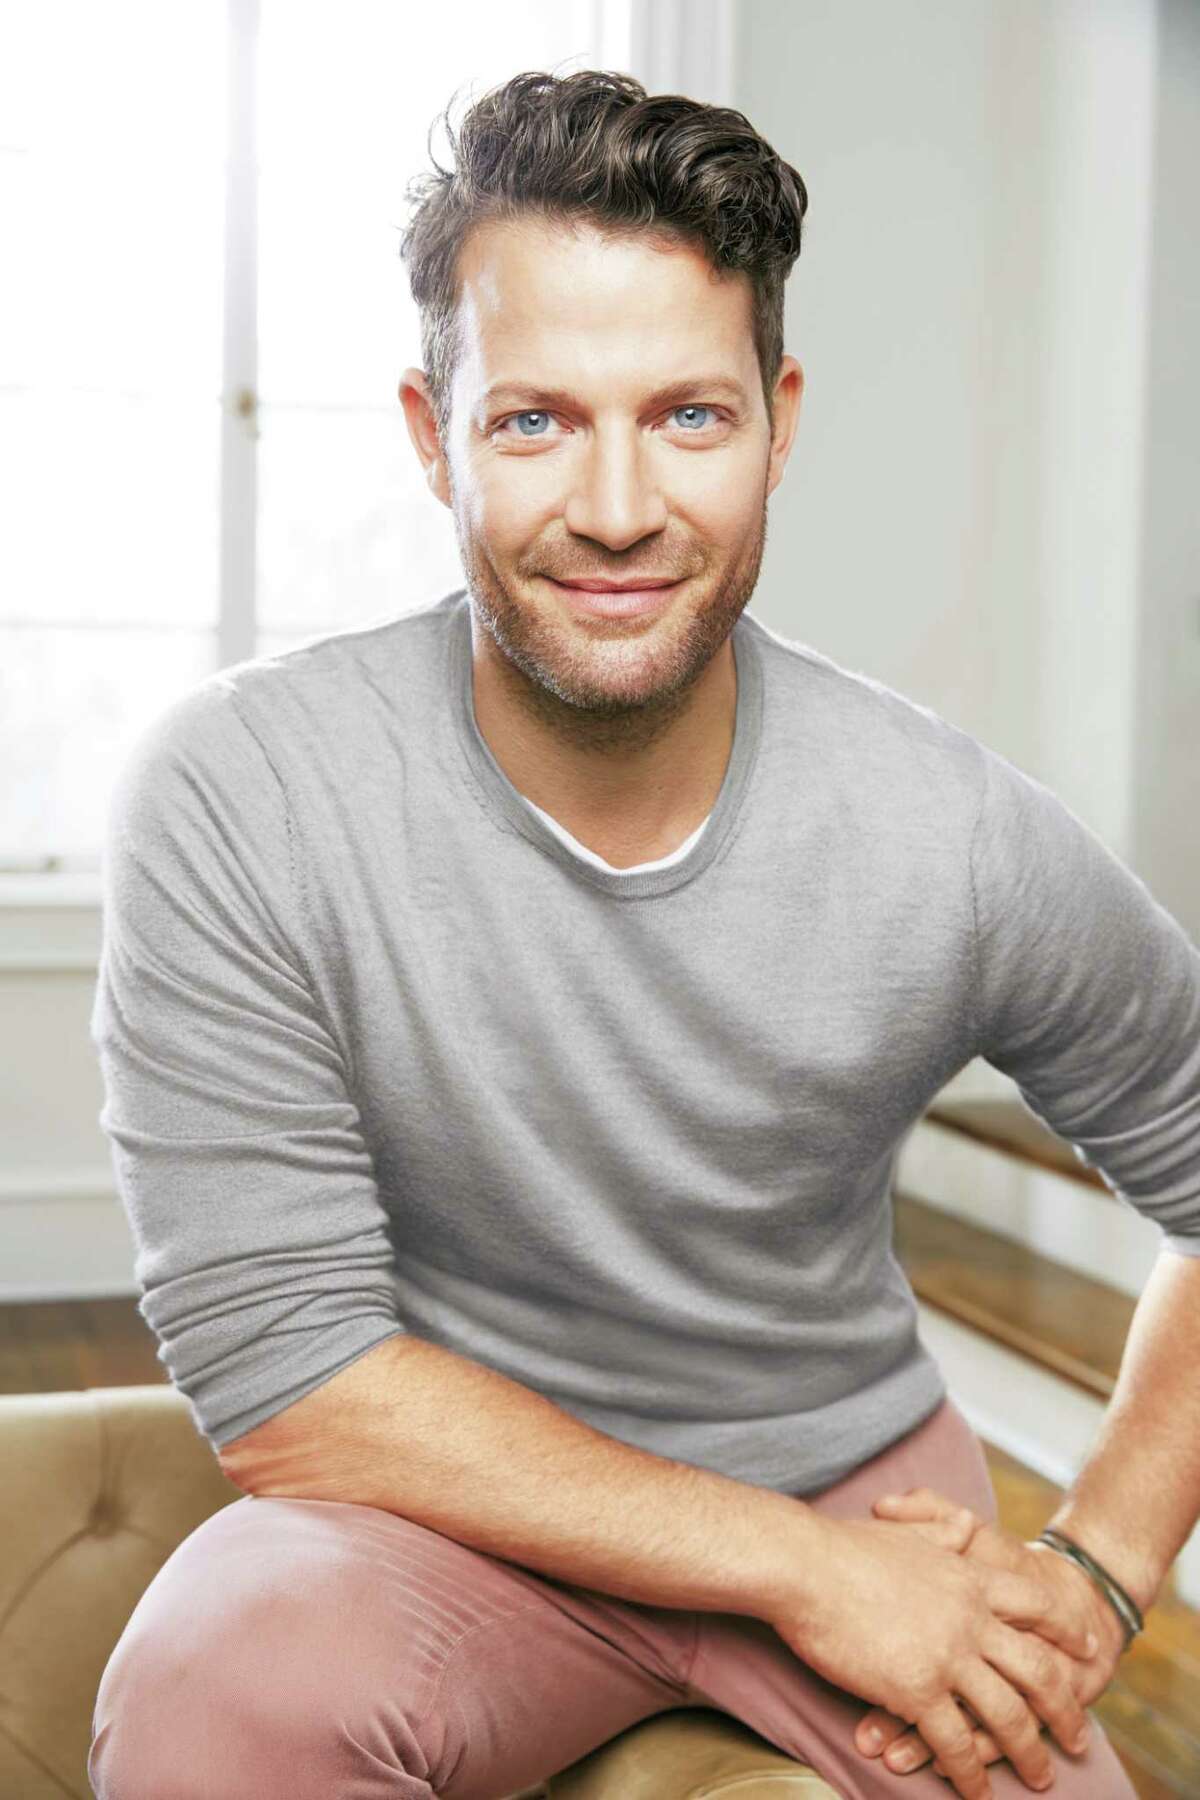 Designer and TV personality Nate Berkus has designed a collection of roller shades for the Shade Store.